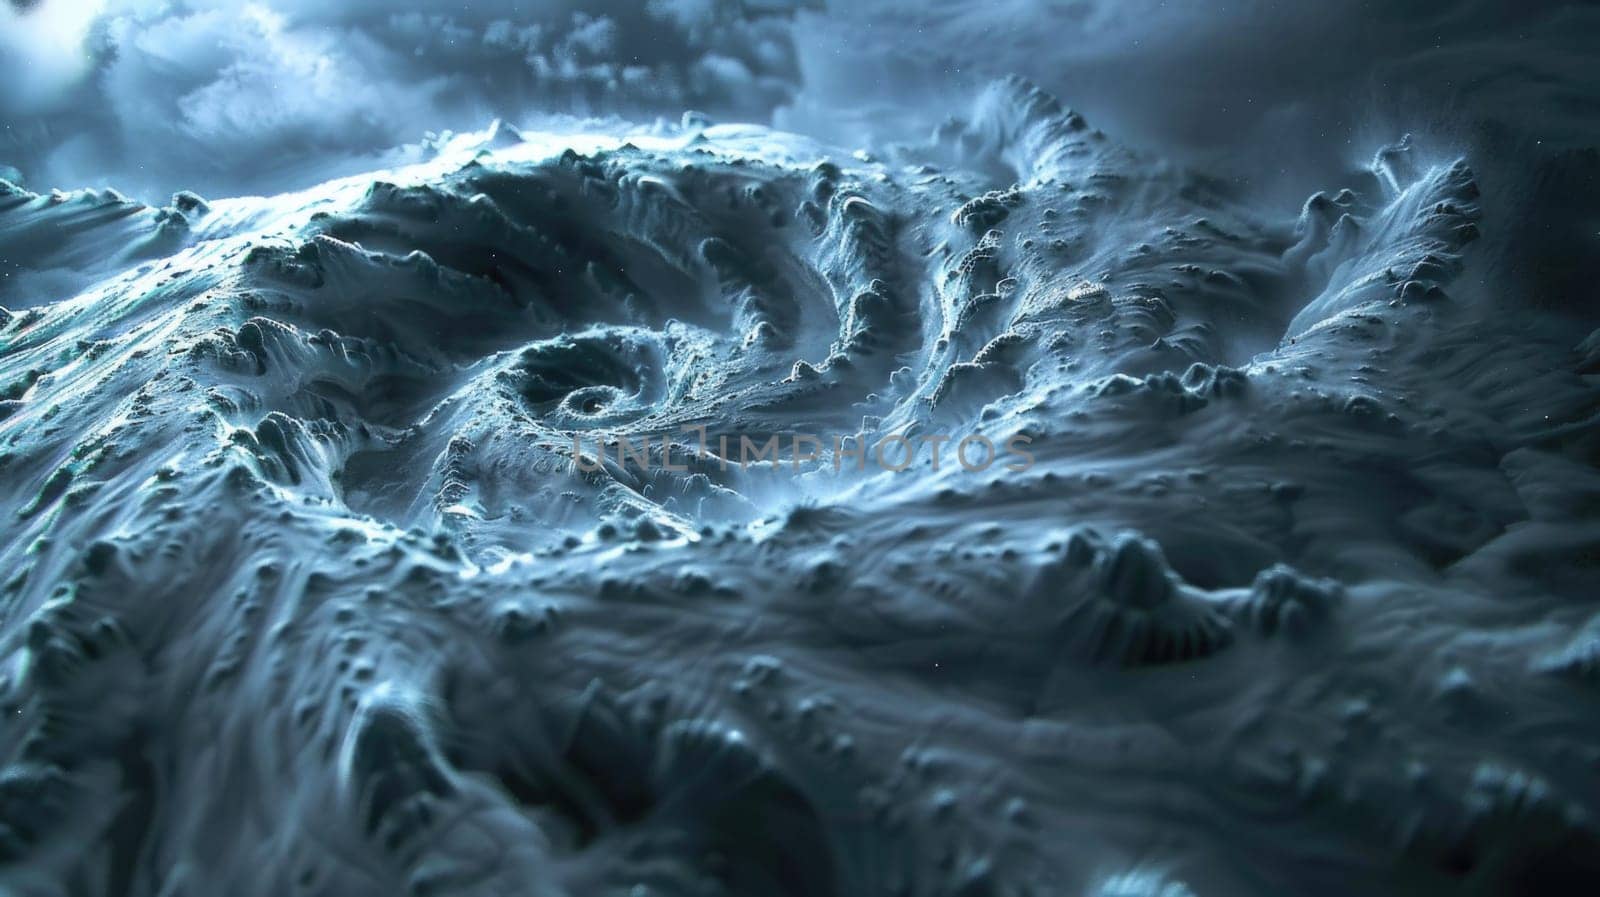 A very large wave crashing in the middle of the ocean, creating a powerful and turbulent display of natures forces.